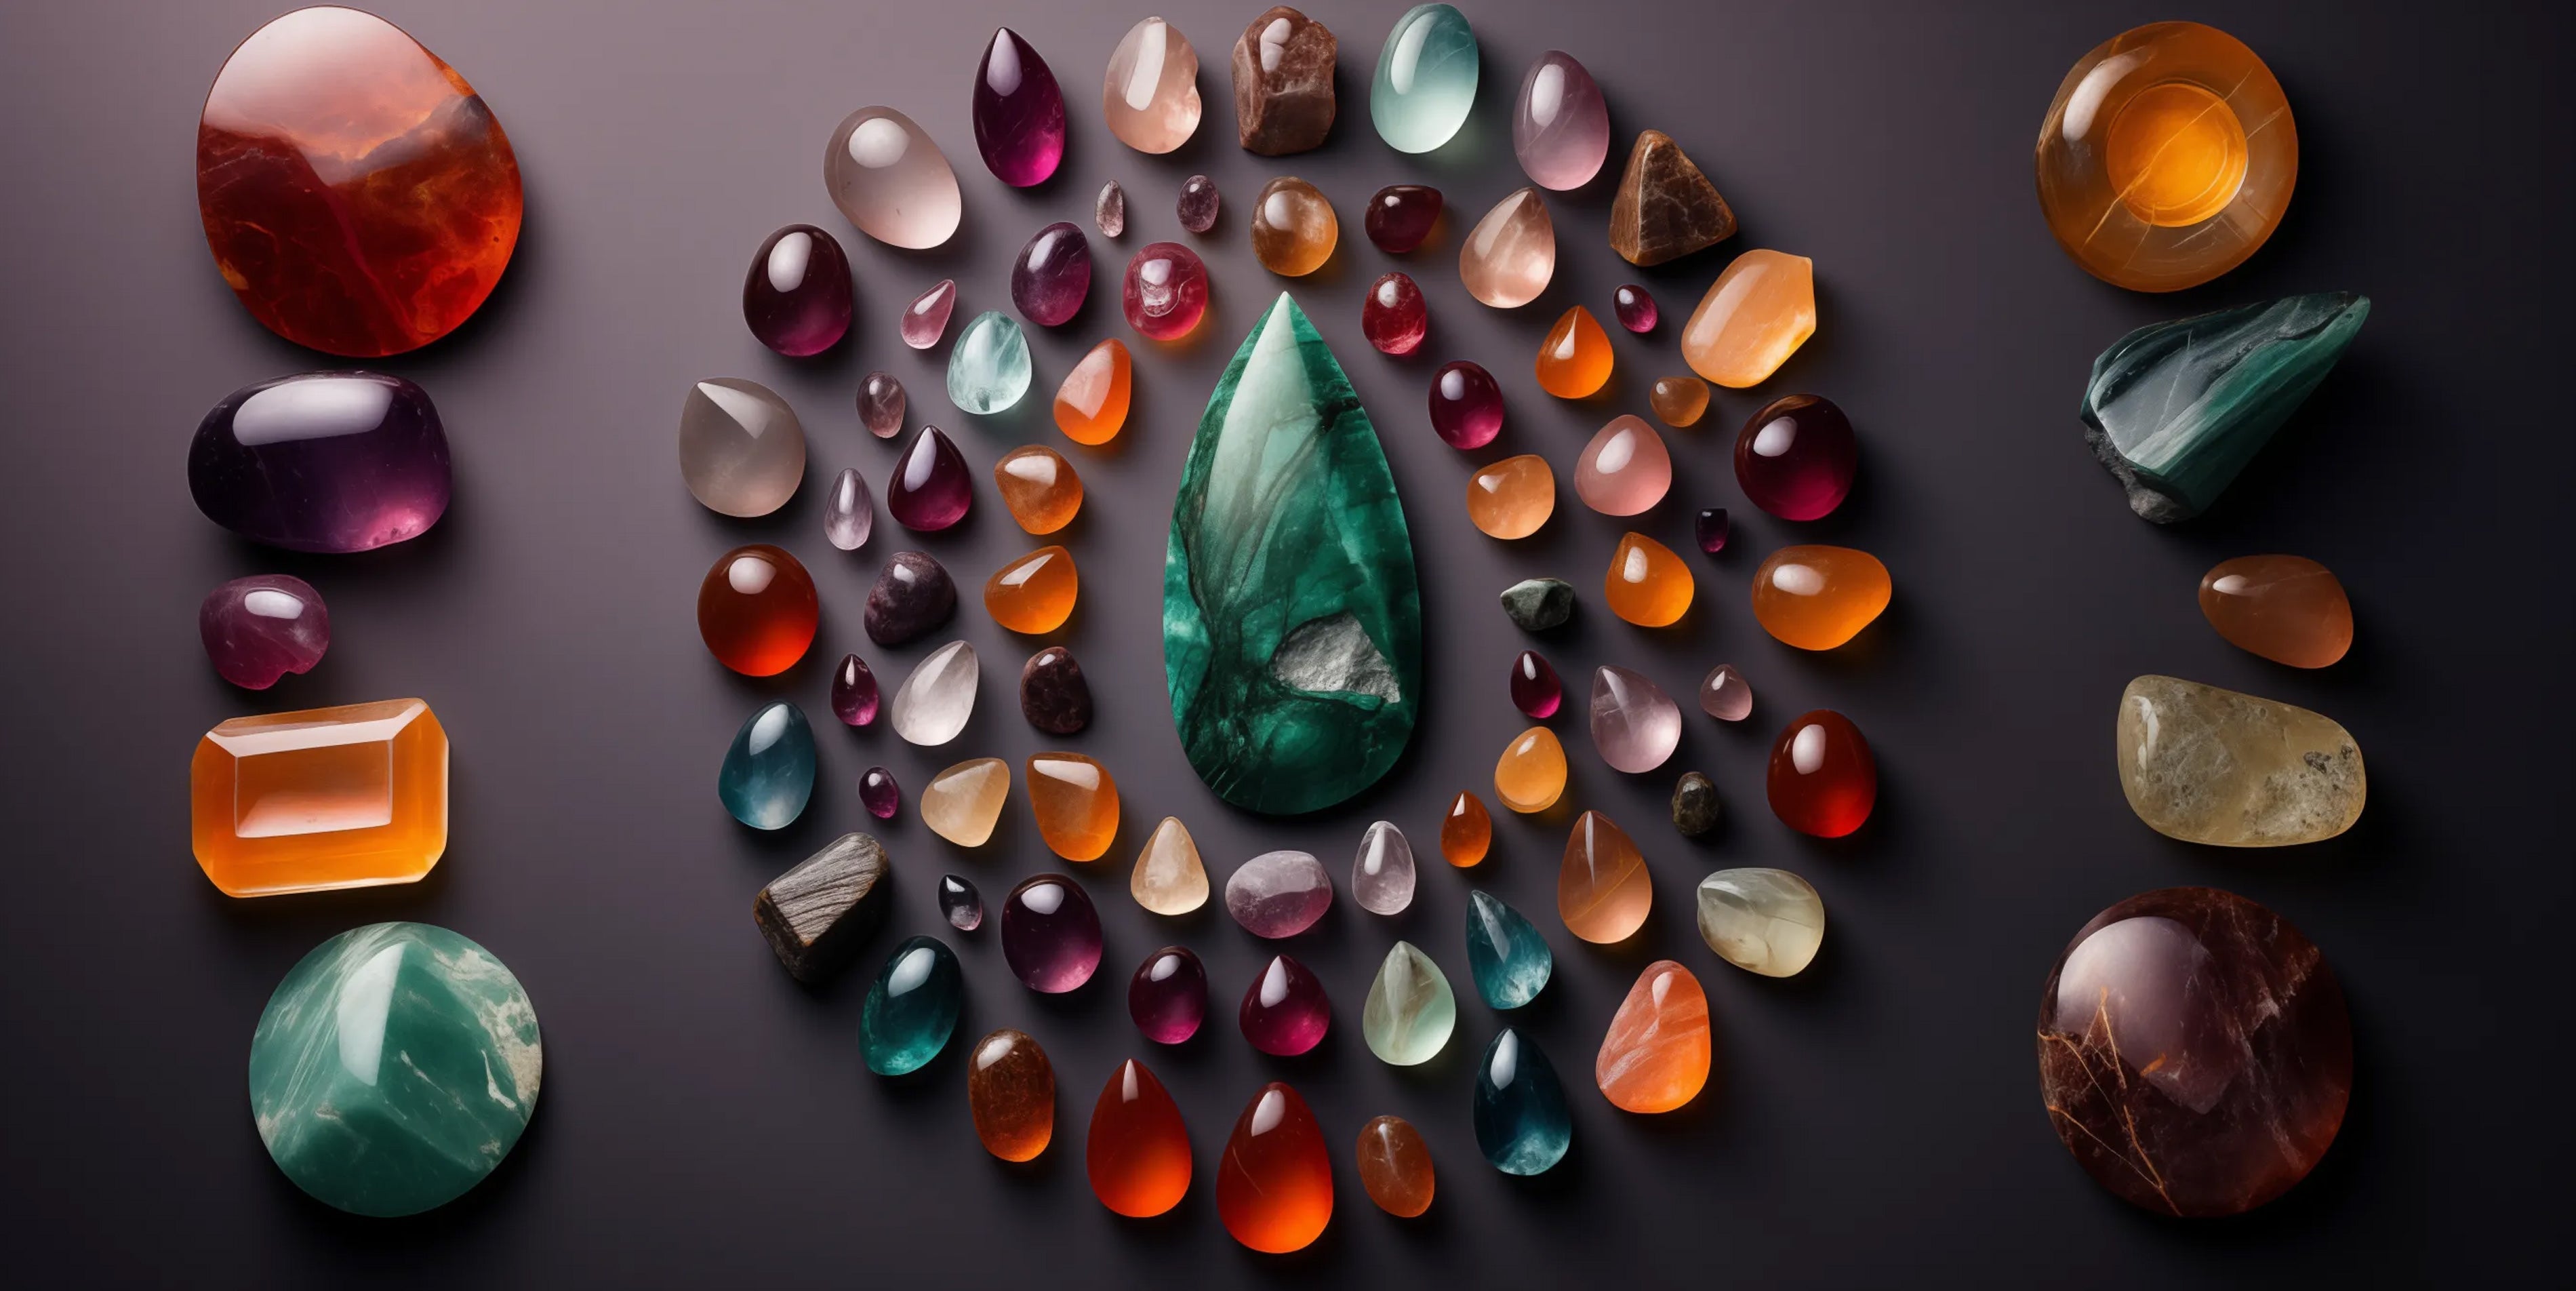 discover differences between curated stones and season stones